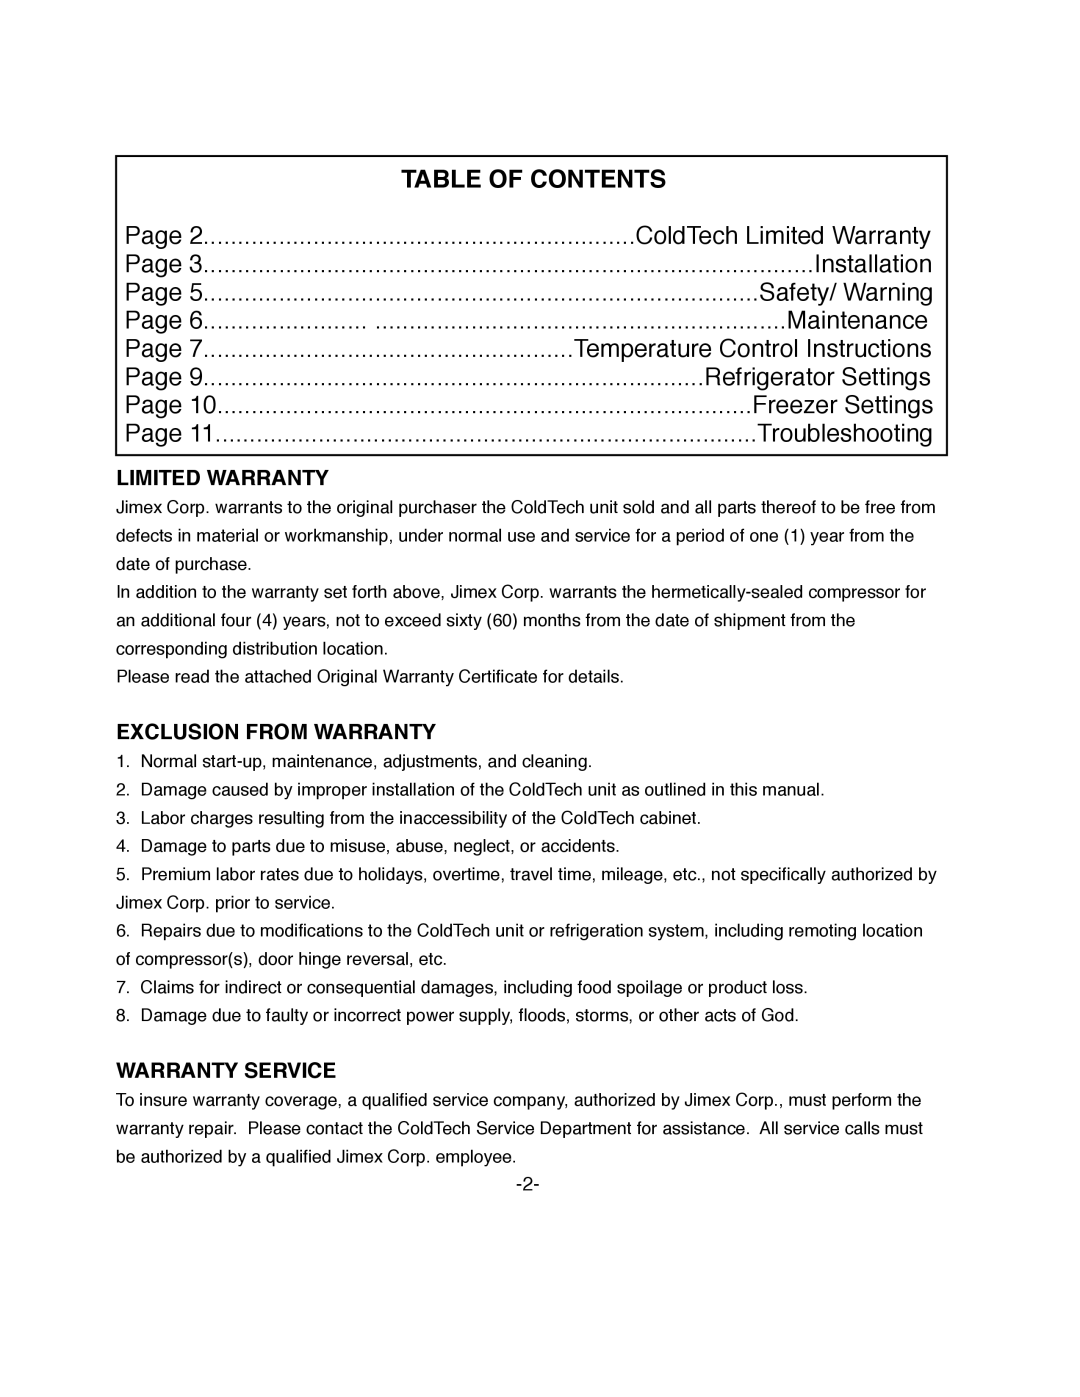 ColdTech FD-1R Table Of Contents, ColdTech Limited Warranty, Installation, Safety/ Warning, Maintenance, Freezer Settings 